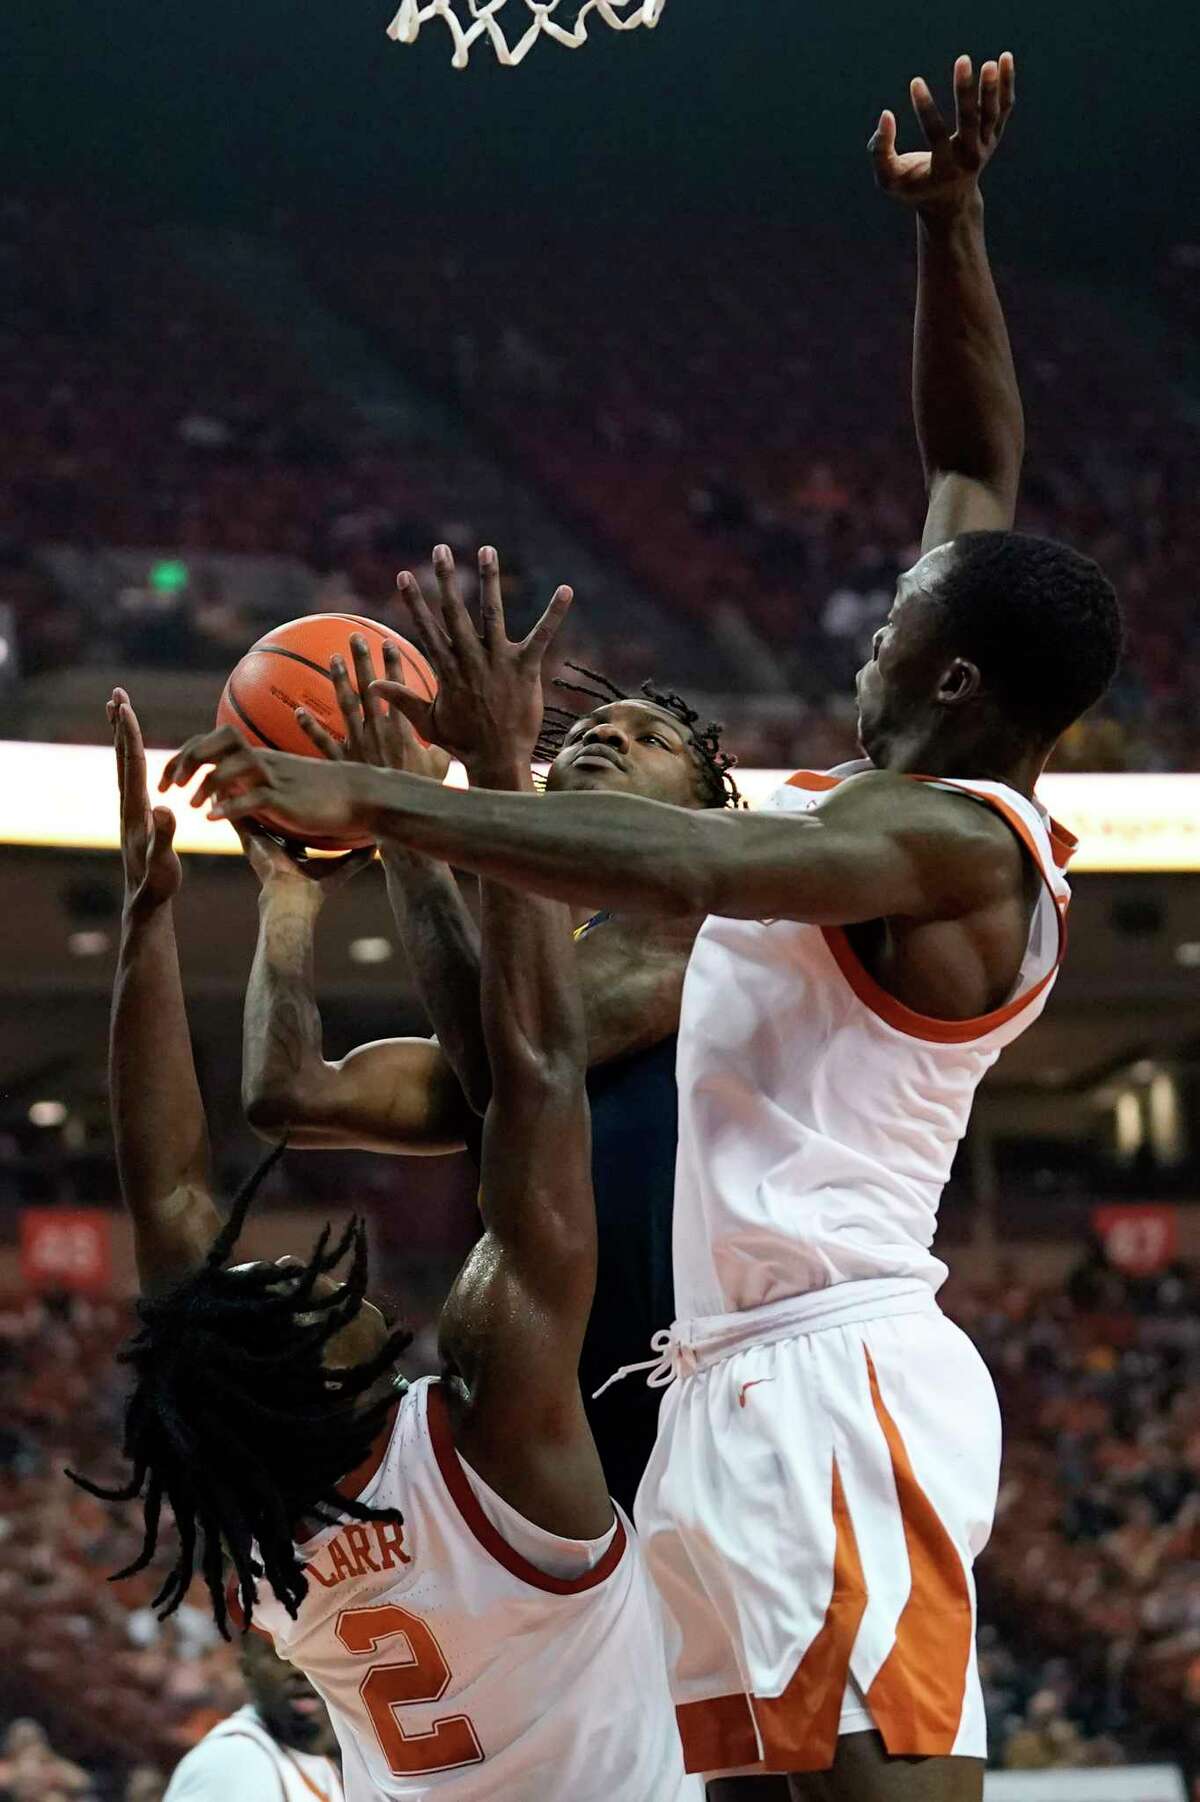 West Virginia guard Kedrian Johnson drives to the basket between Texas guard Marcus Carr (2) and guard Andrew Jones, right, during the first half of an NCAA college basketball game, Saturday, Jan. 1, 2022, in Austin, Texas. (AP Photo/Eric Gay)